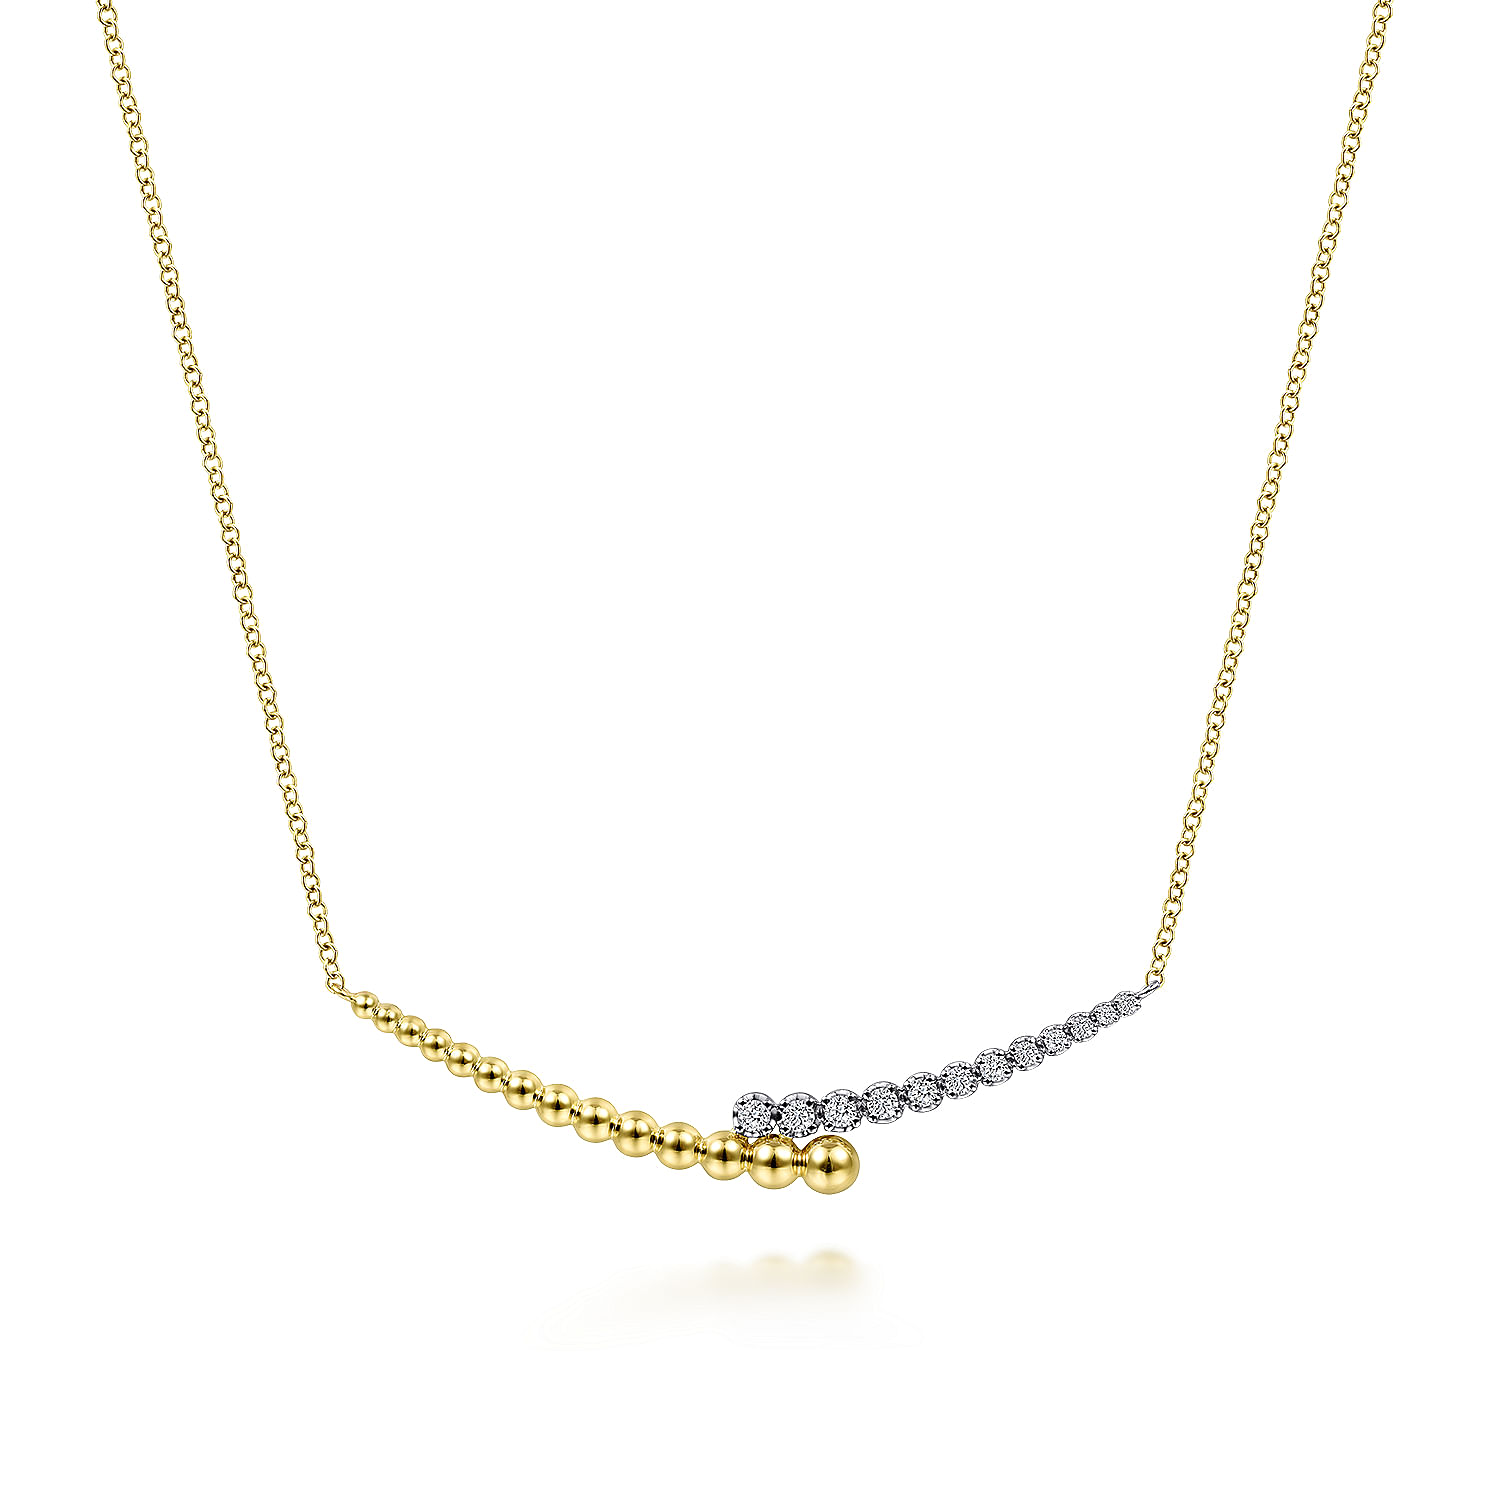 14K Yellow-White Gold Diamond By-Pass and Bujukan Bead Curved Bar Necklace with Butter Cup Setting in size 17.5 inch